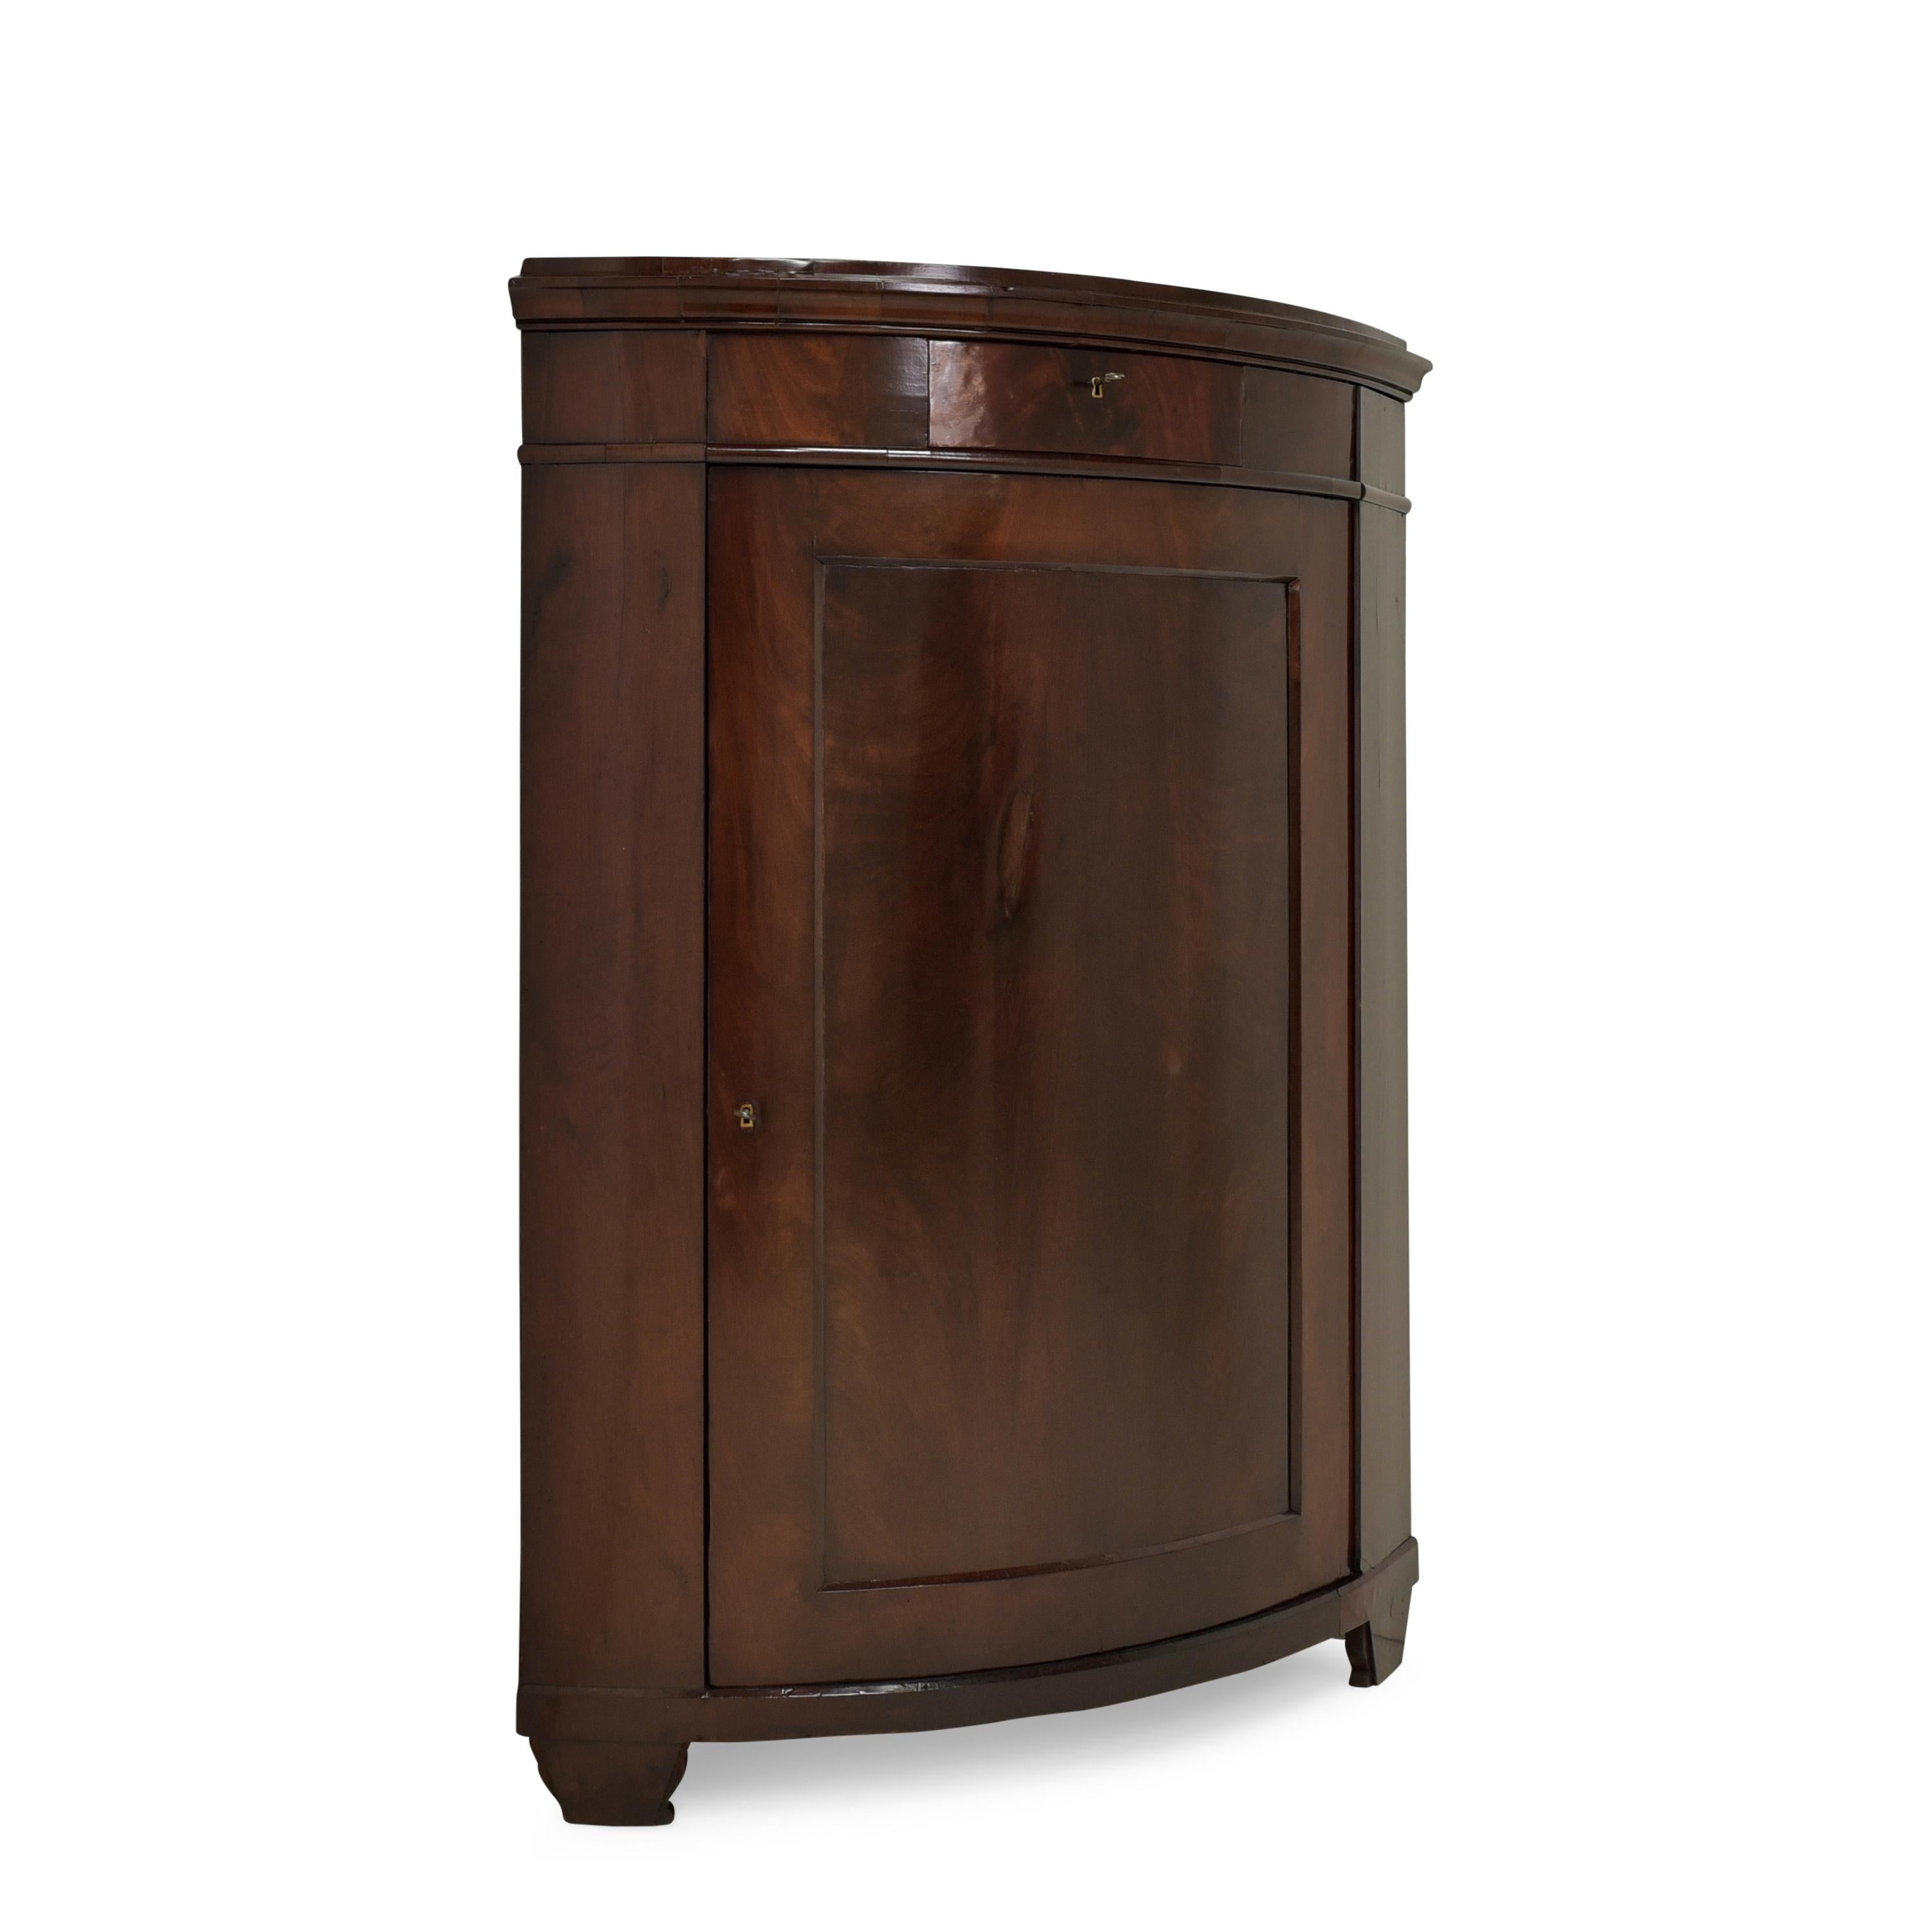 Corner cupboard restored Biedermeier around 1840 mahogany corner dresser

Features:
Single-door model with three shelves and small drawer
Drawer pronged
No-nonsense design
Relatively large model

Additional Information:
Material: Mahogany